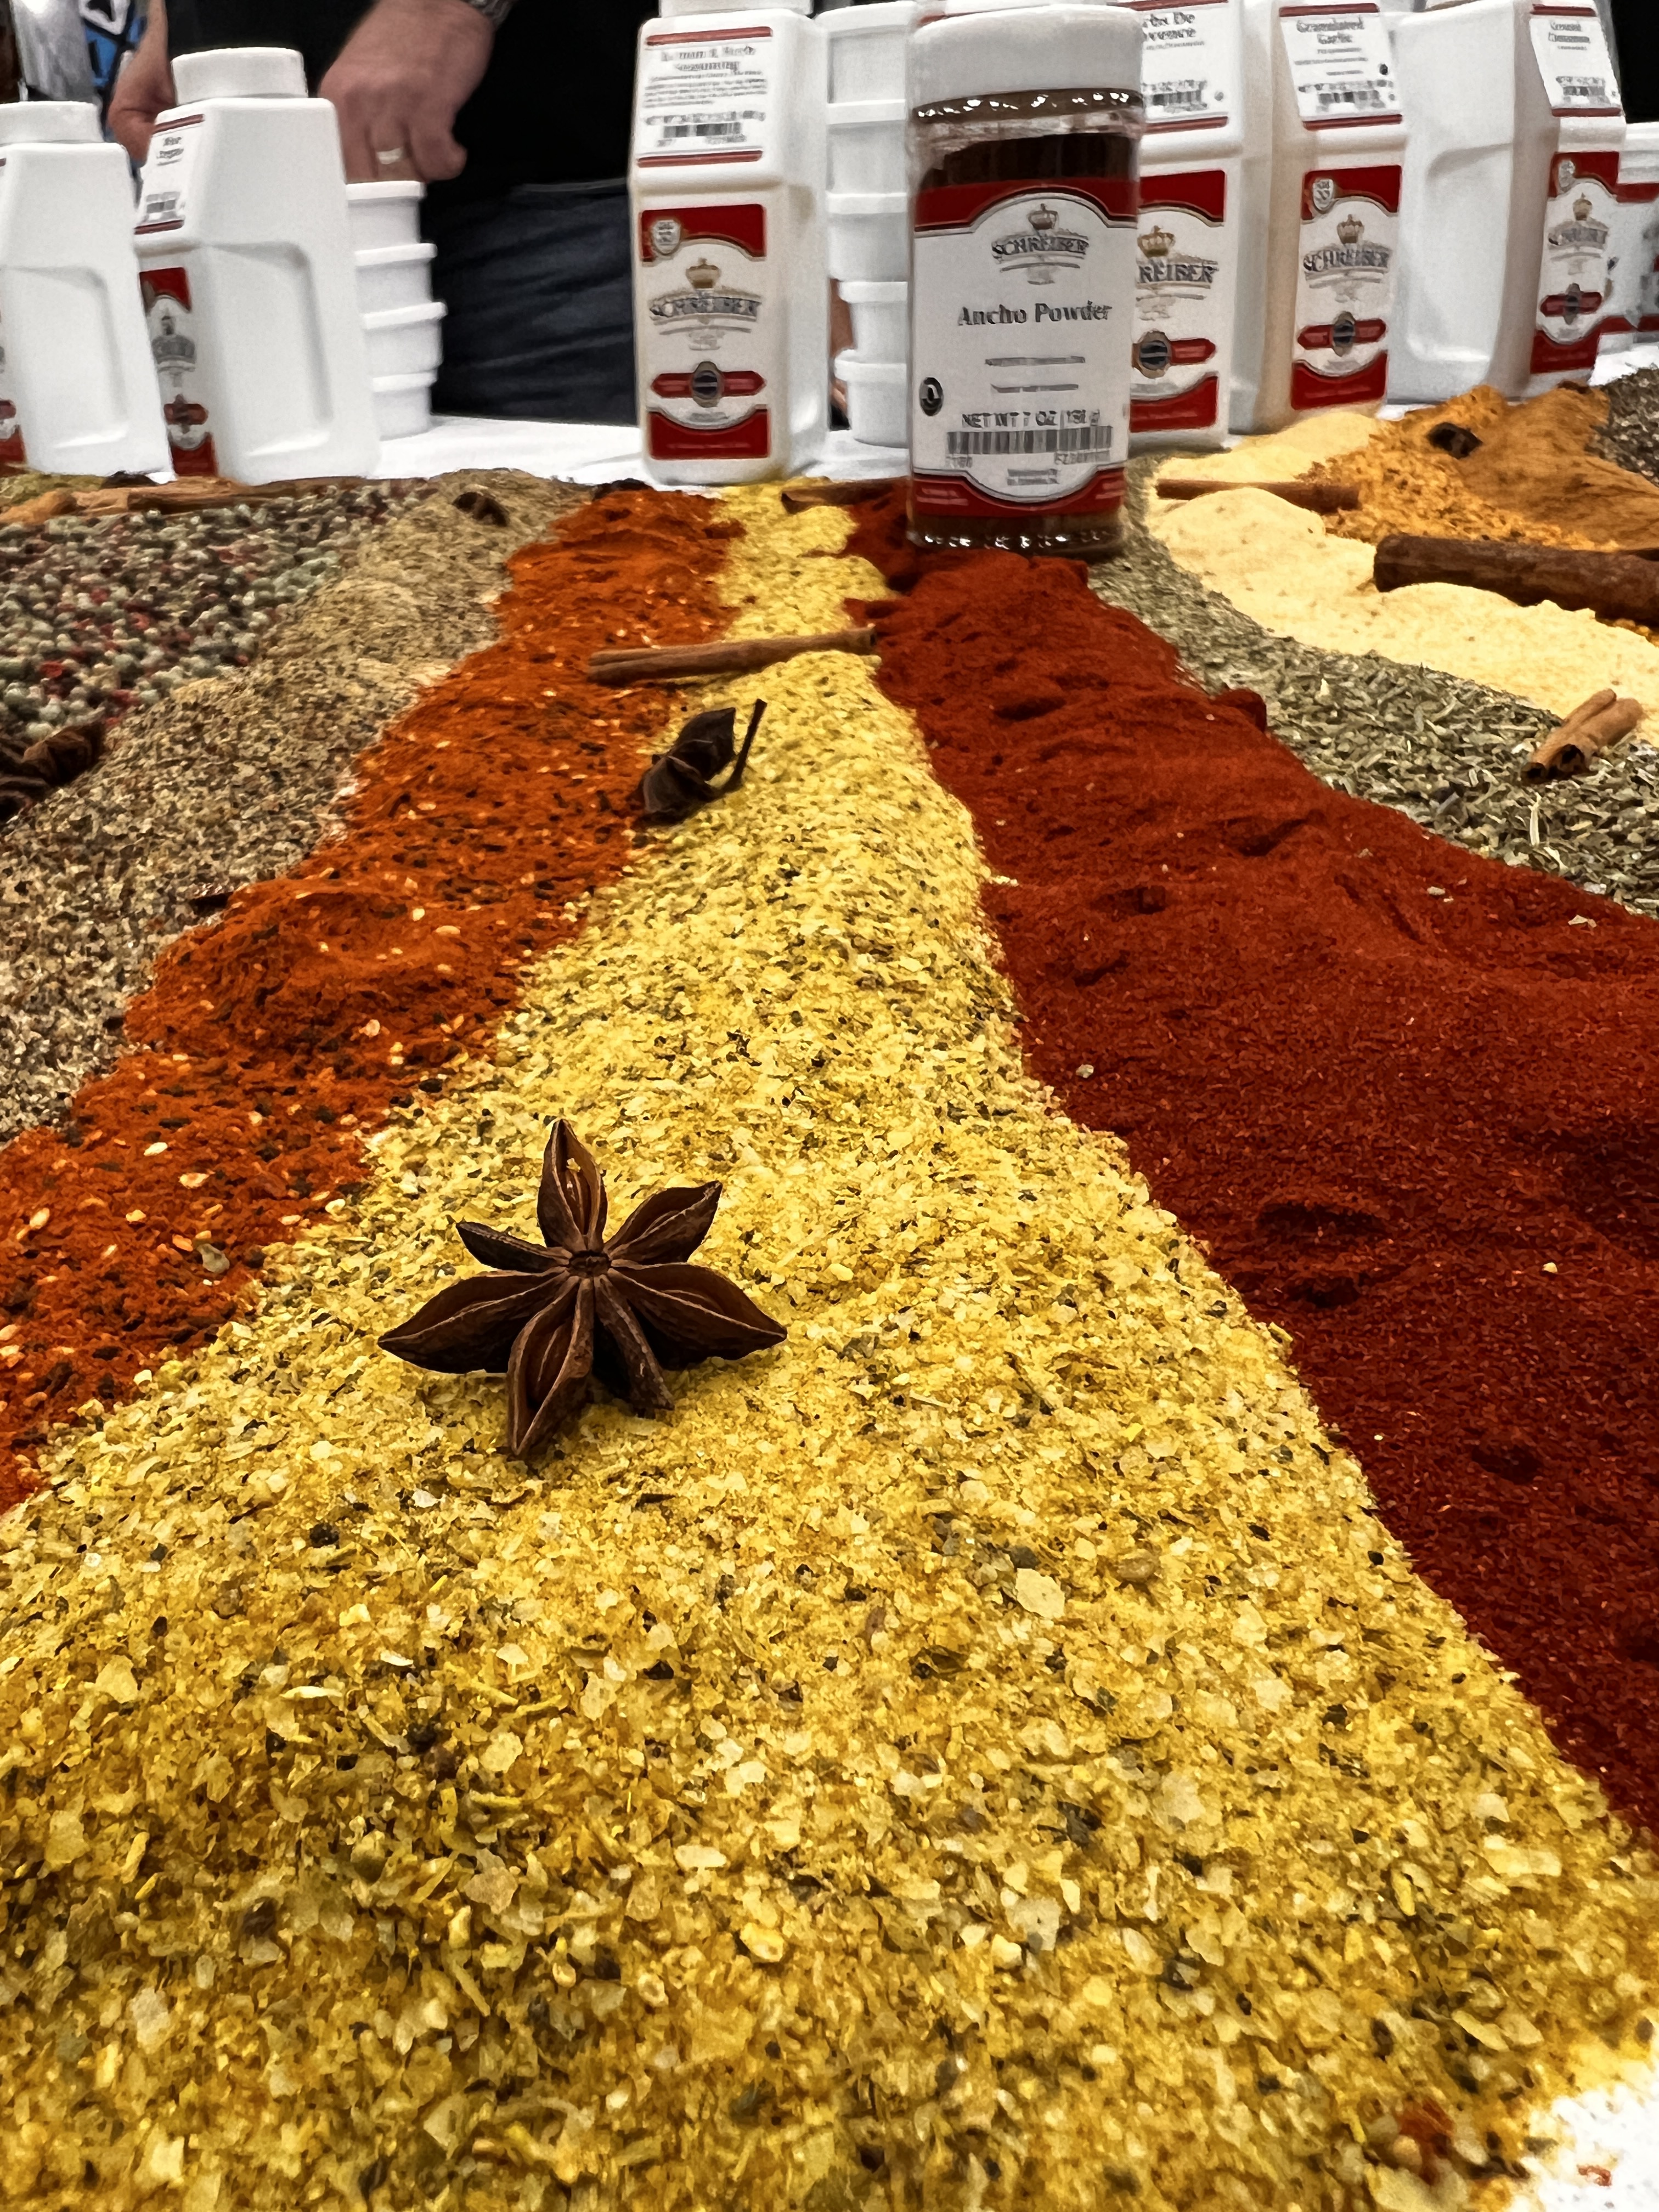 A River of spices from the Schreiber Spice Company caught our eye.